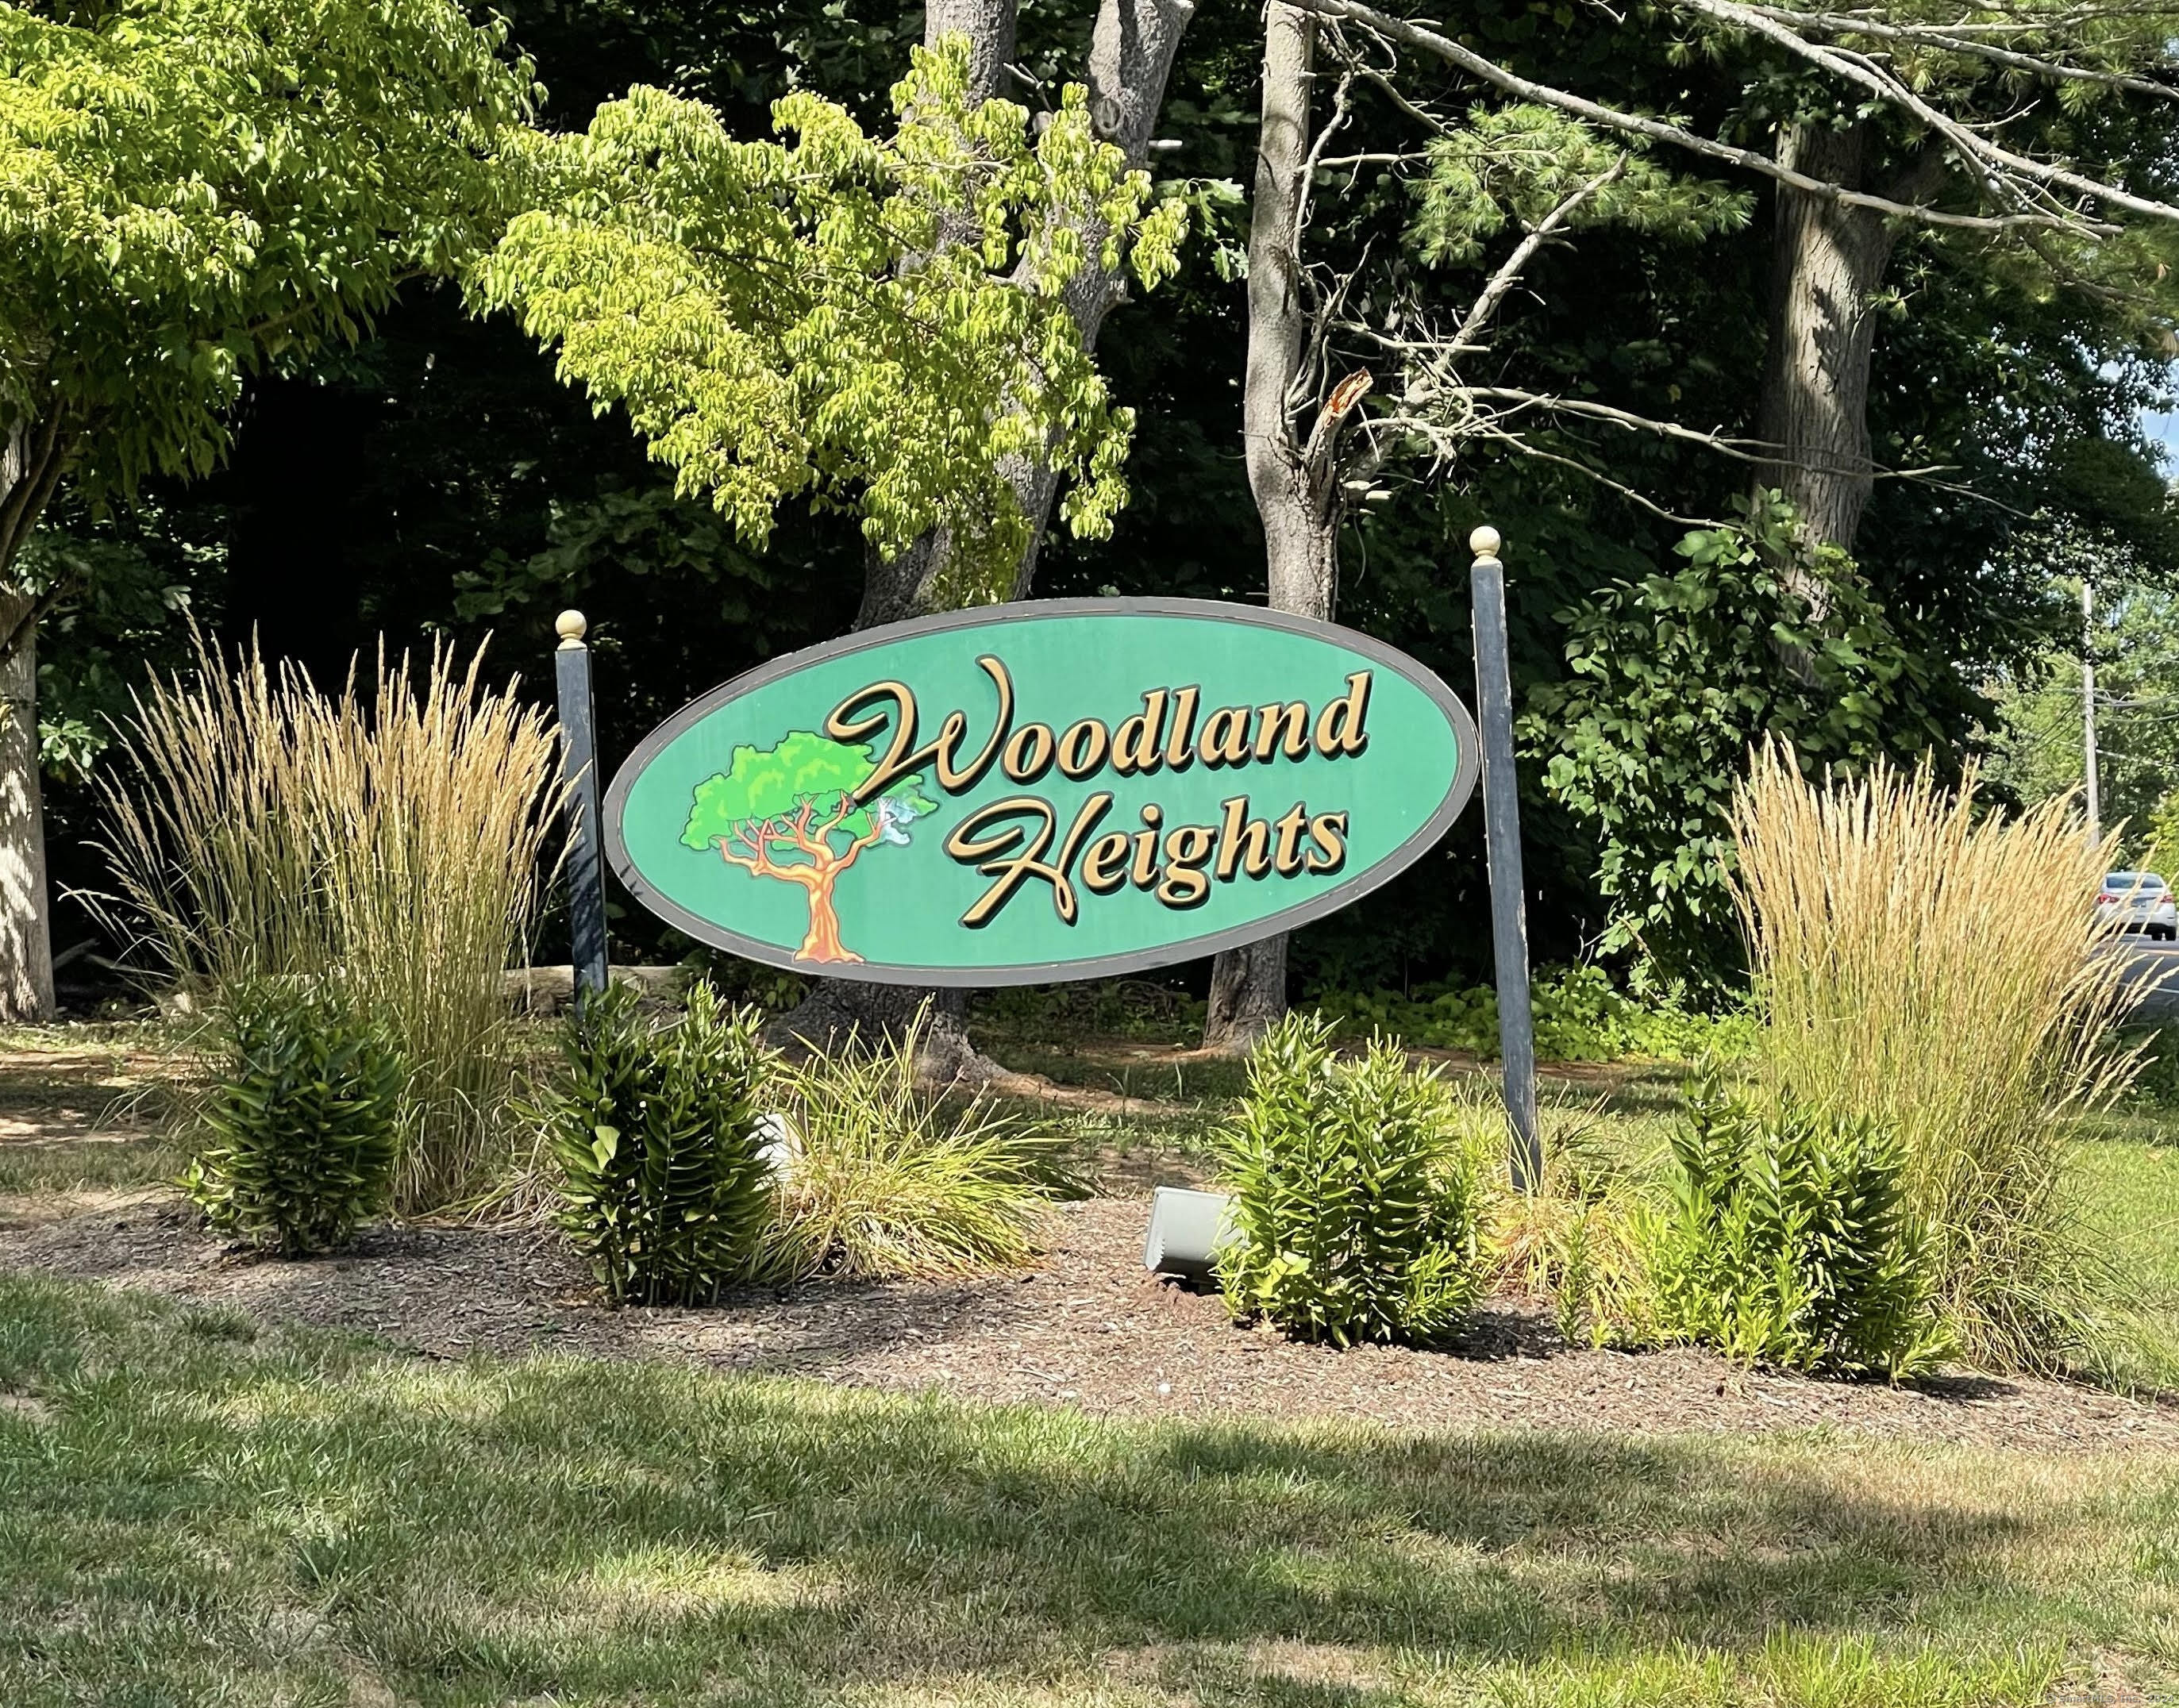 Welcome to the charming Woodland Heights Complex in Cromwell, CT! This lovely 2-bedroom, 2-bathroom home offers the convenience of HEAT & HOT WATER included in the HOA fees. Enjoy relaxing on your deck or in the warm weather take a dip in the pool. Located near RT 9, this condo is also close to shopping and restaurants, making it the perfect place to call home. Don't miss out on this fantastic opportunity to live in the desirable Woodland Heights Condo community! More photos coming soon!